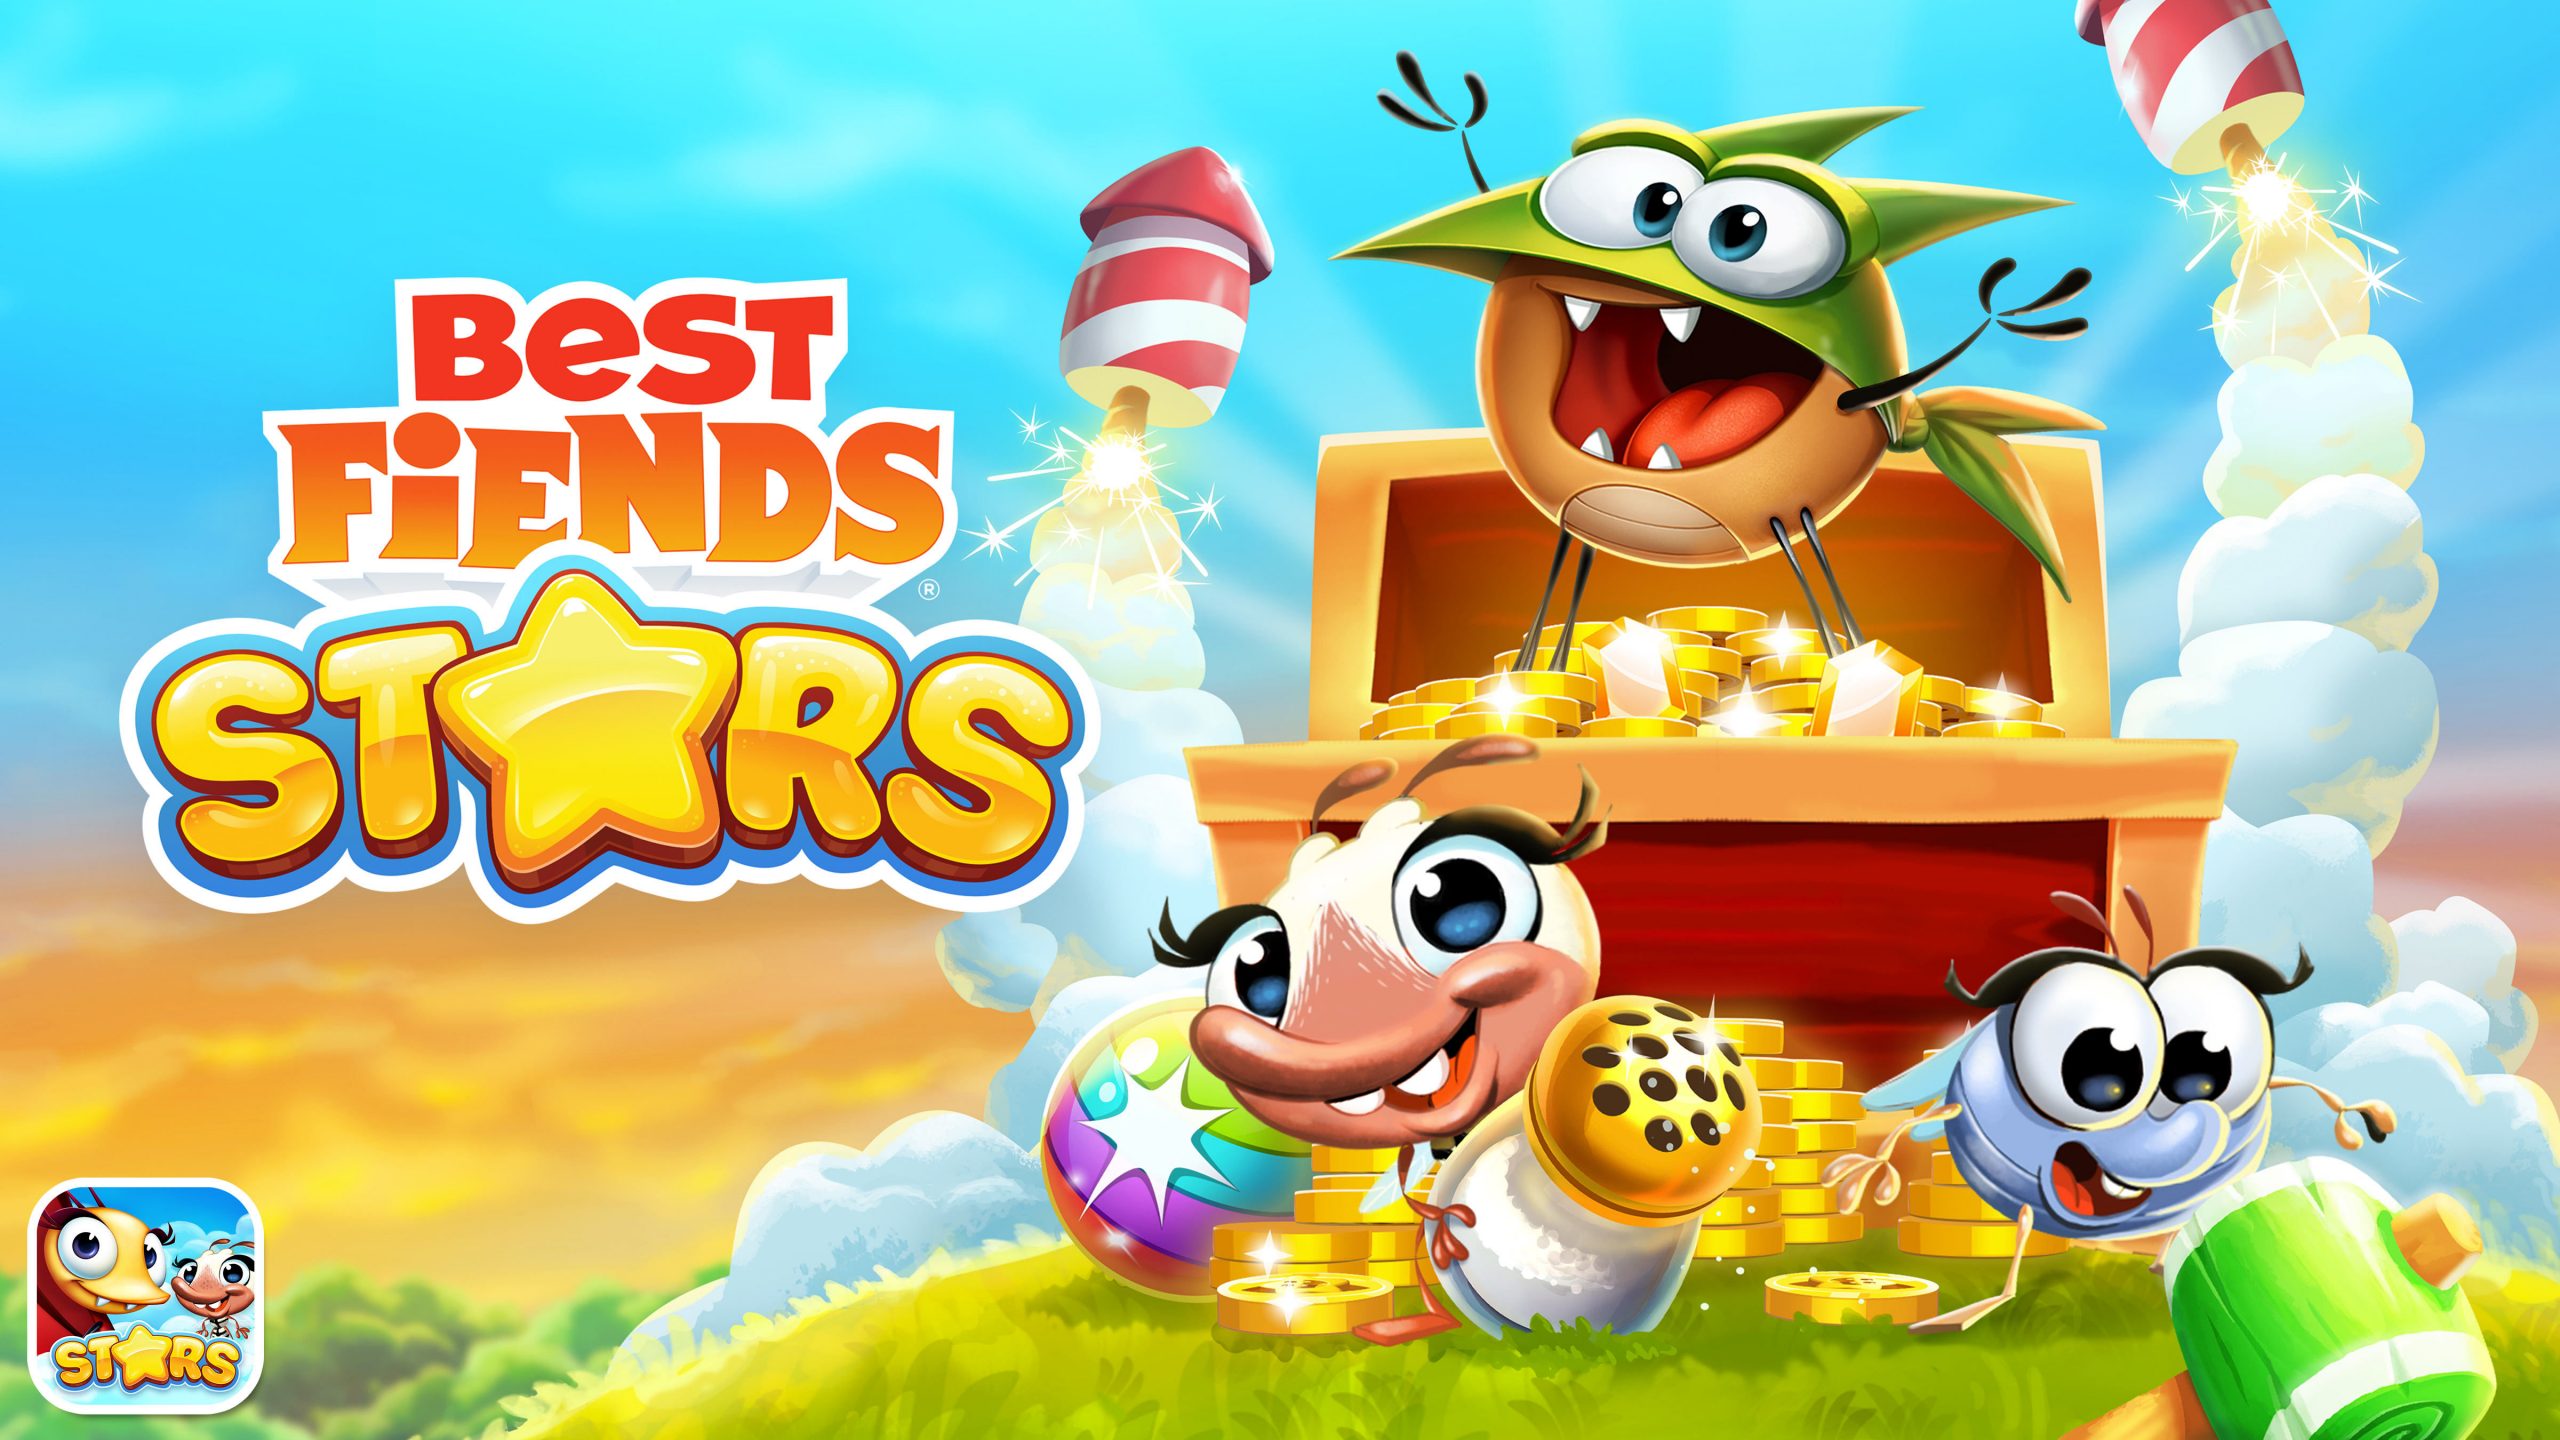 Which game is best. Best friends игра. Best friends игра персонажи. Букашки игра. Игра best friends букашки.